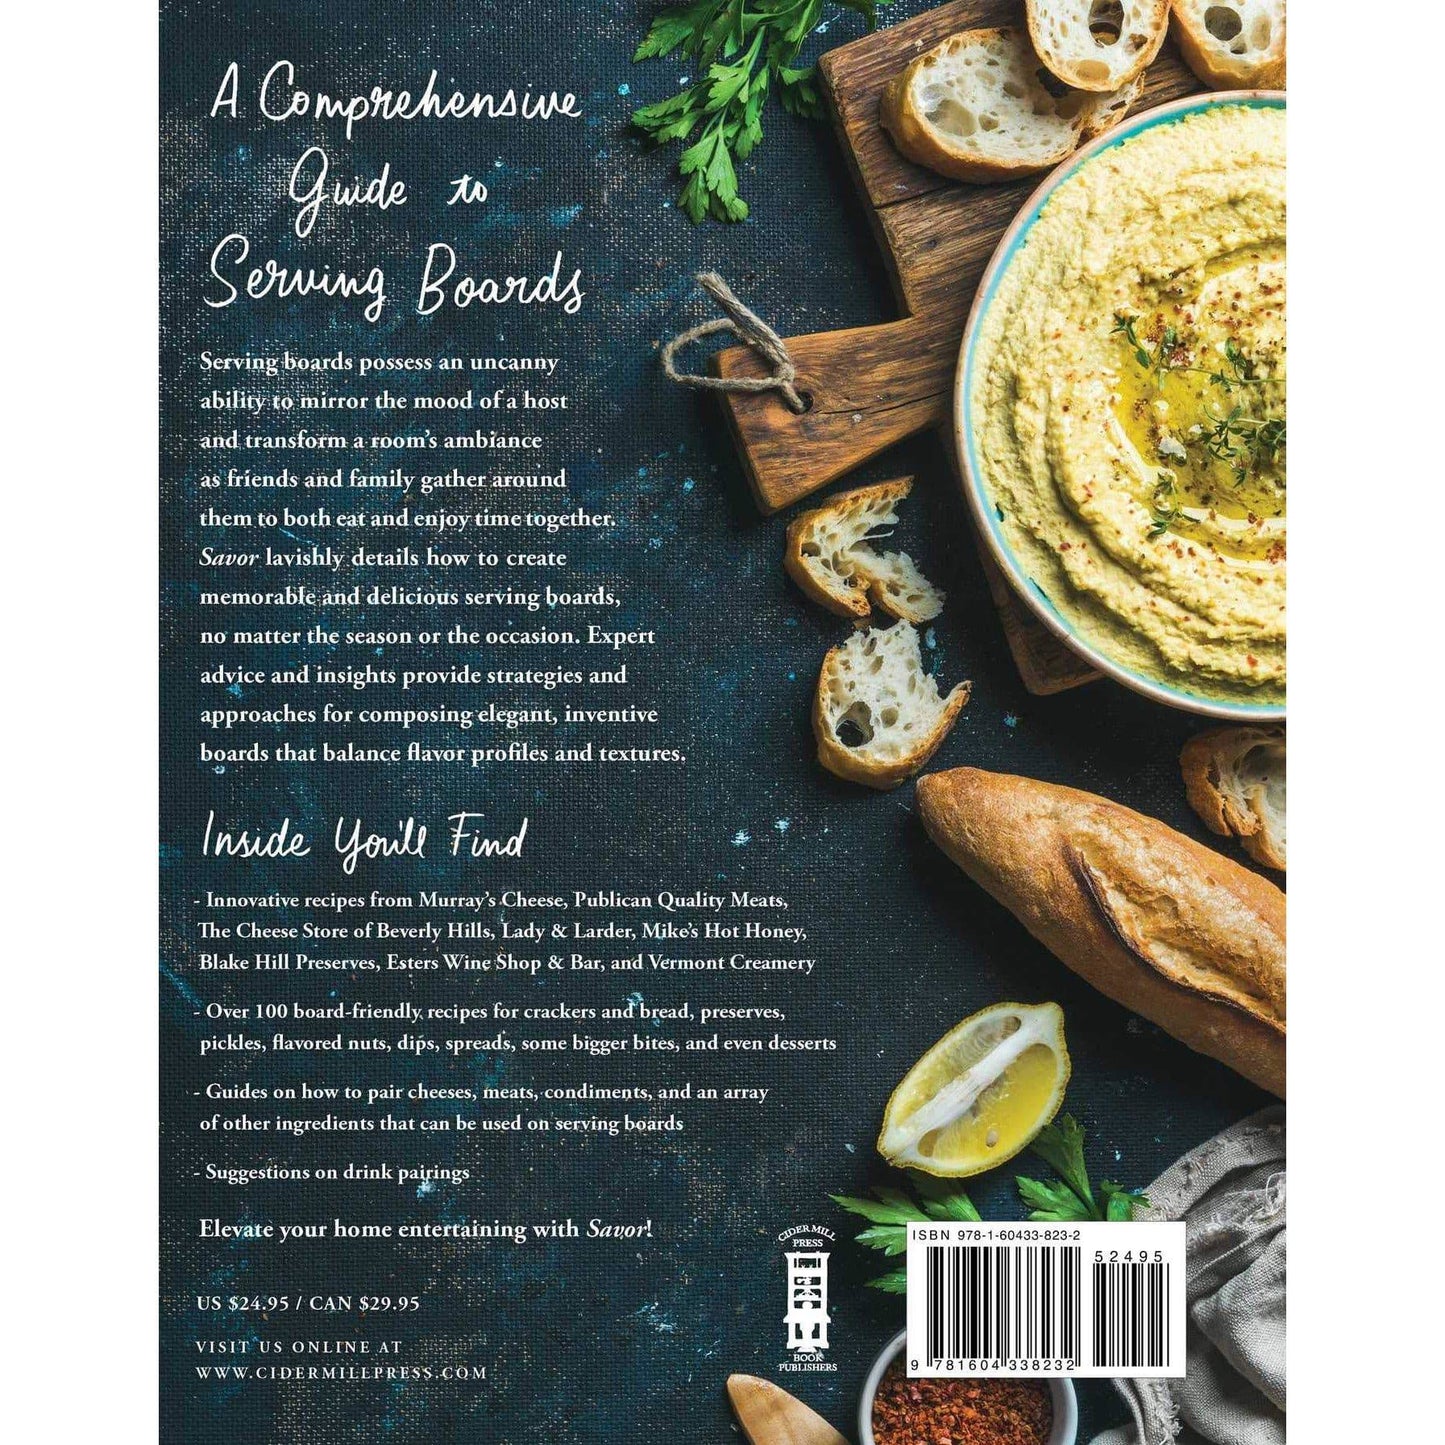 Savor: Entertaining with Charcuterie, Cheese, Spreads & More - Findlay Rowe Designs